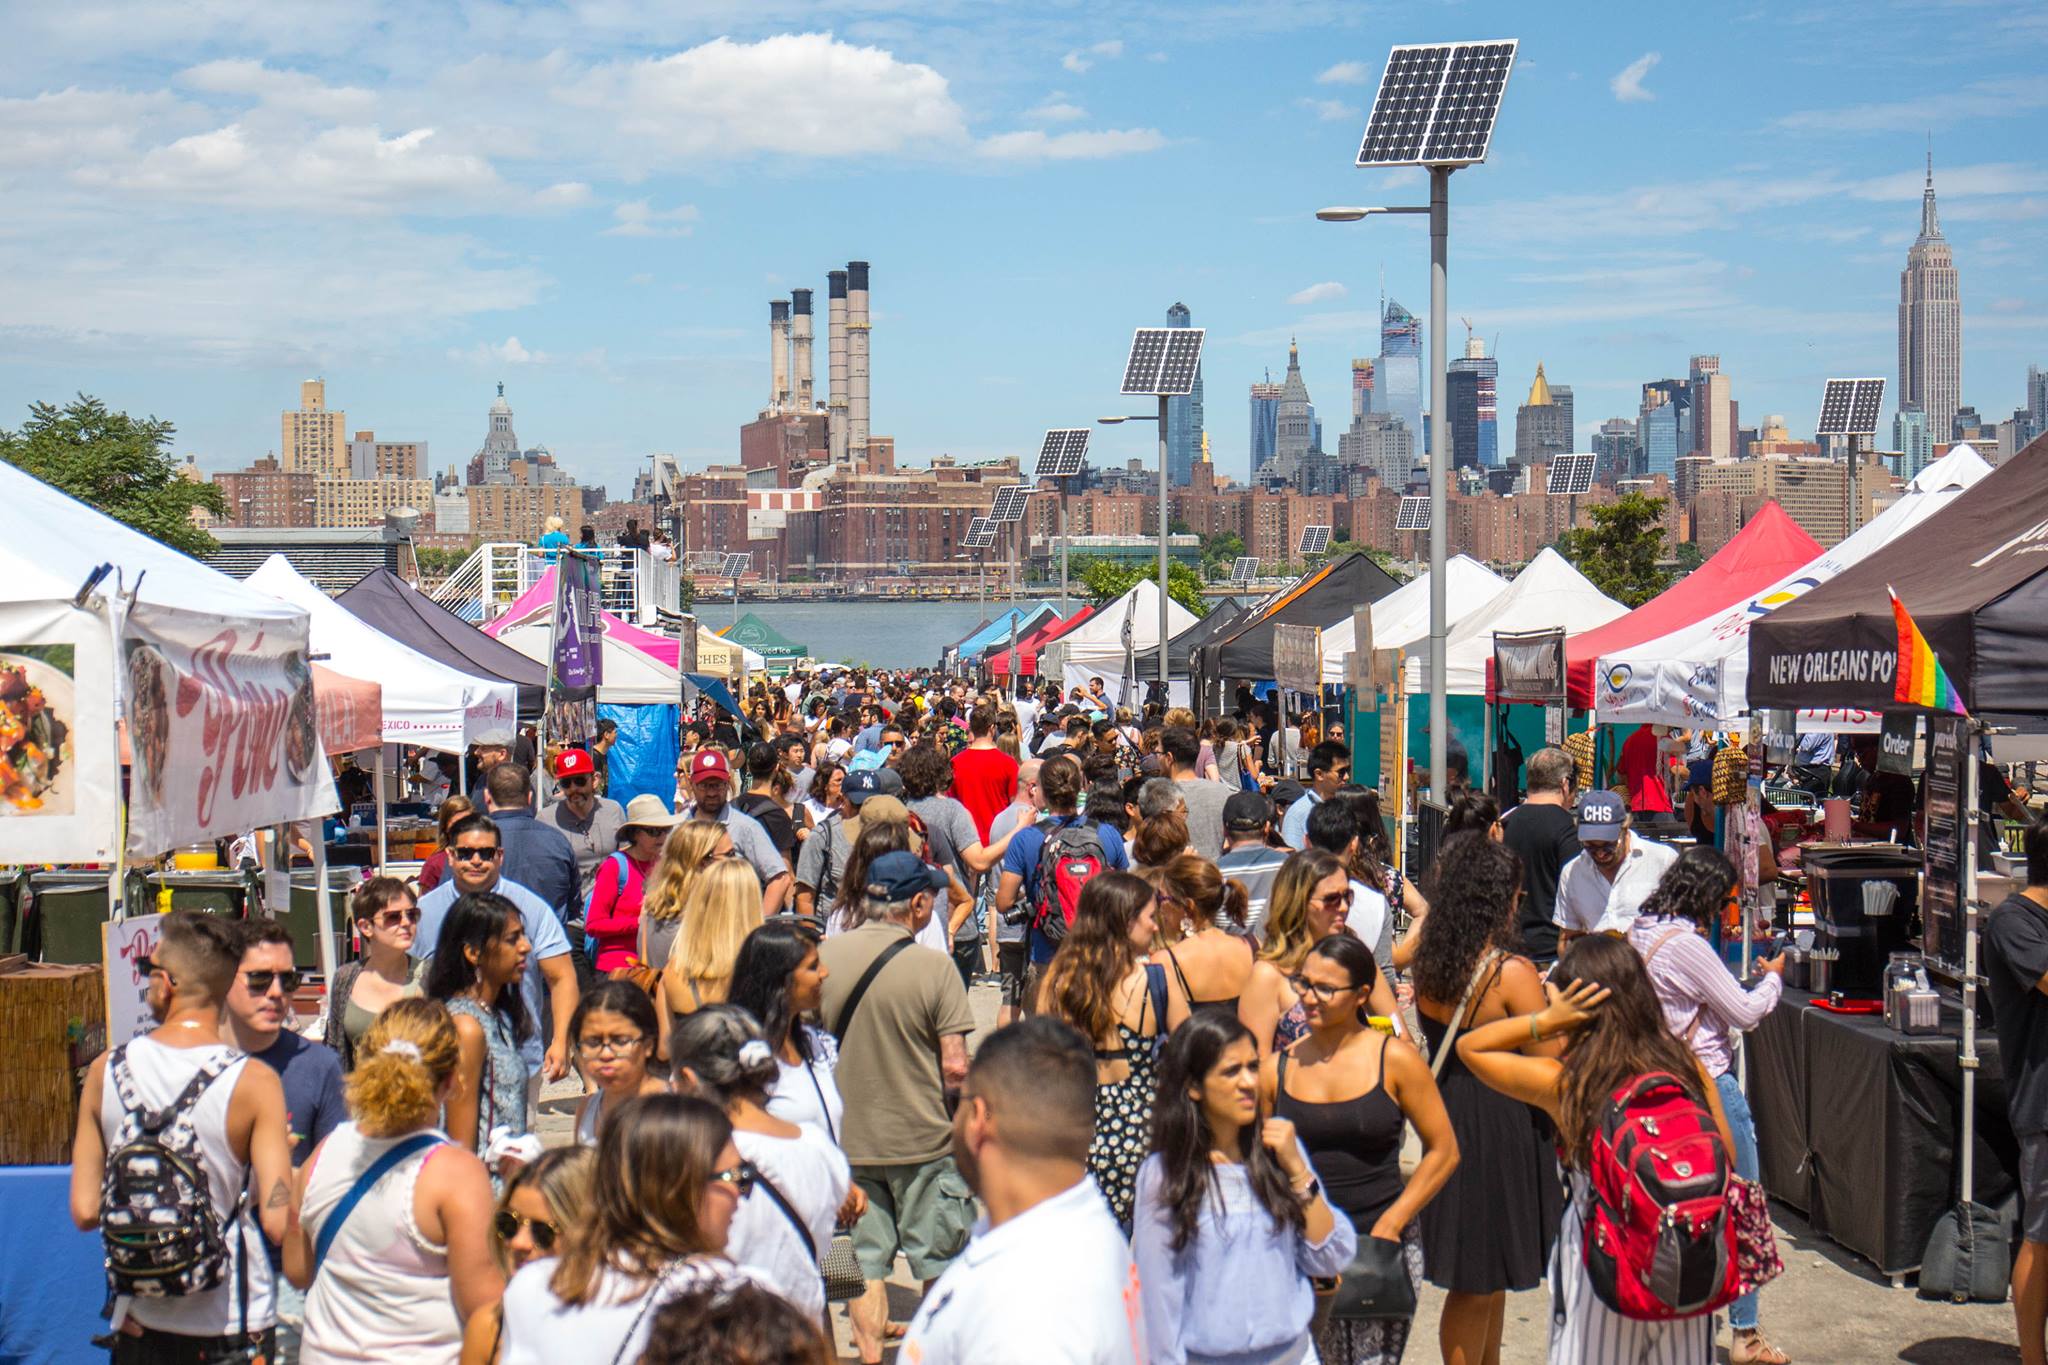 Group of adults walking the food vendor tents of Smorgasburg